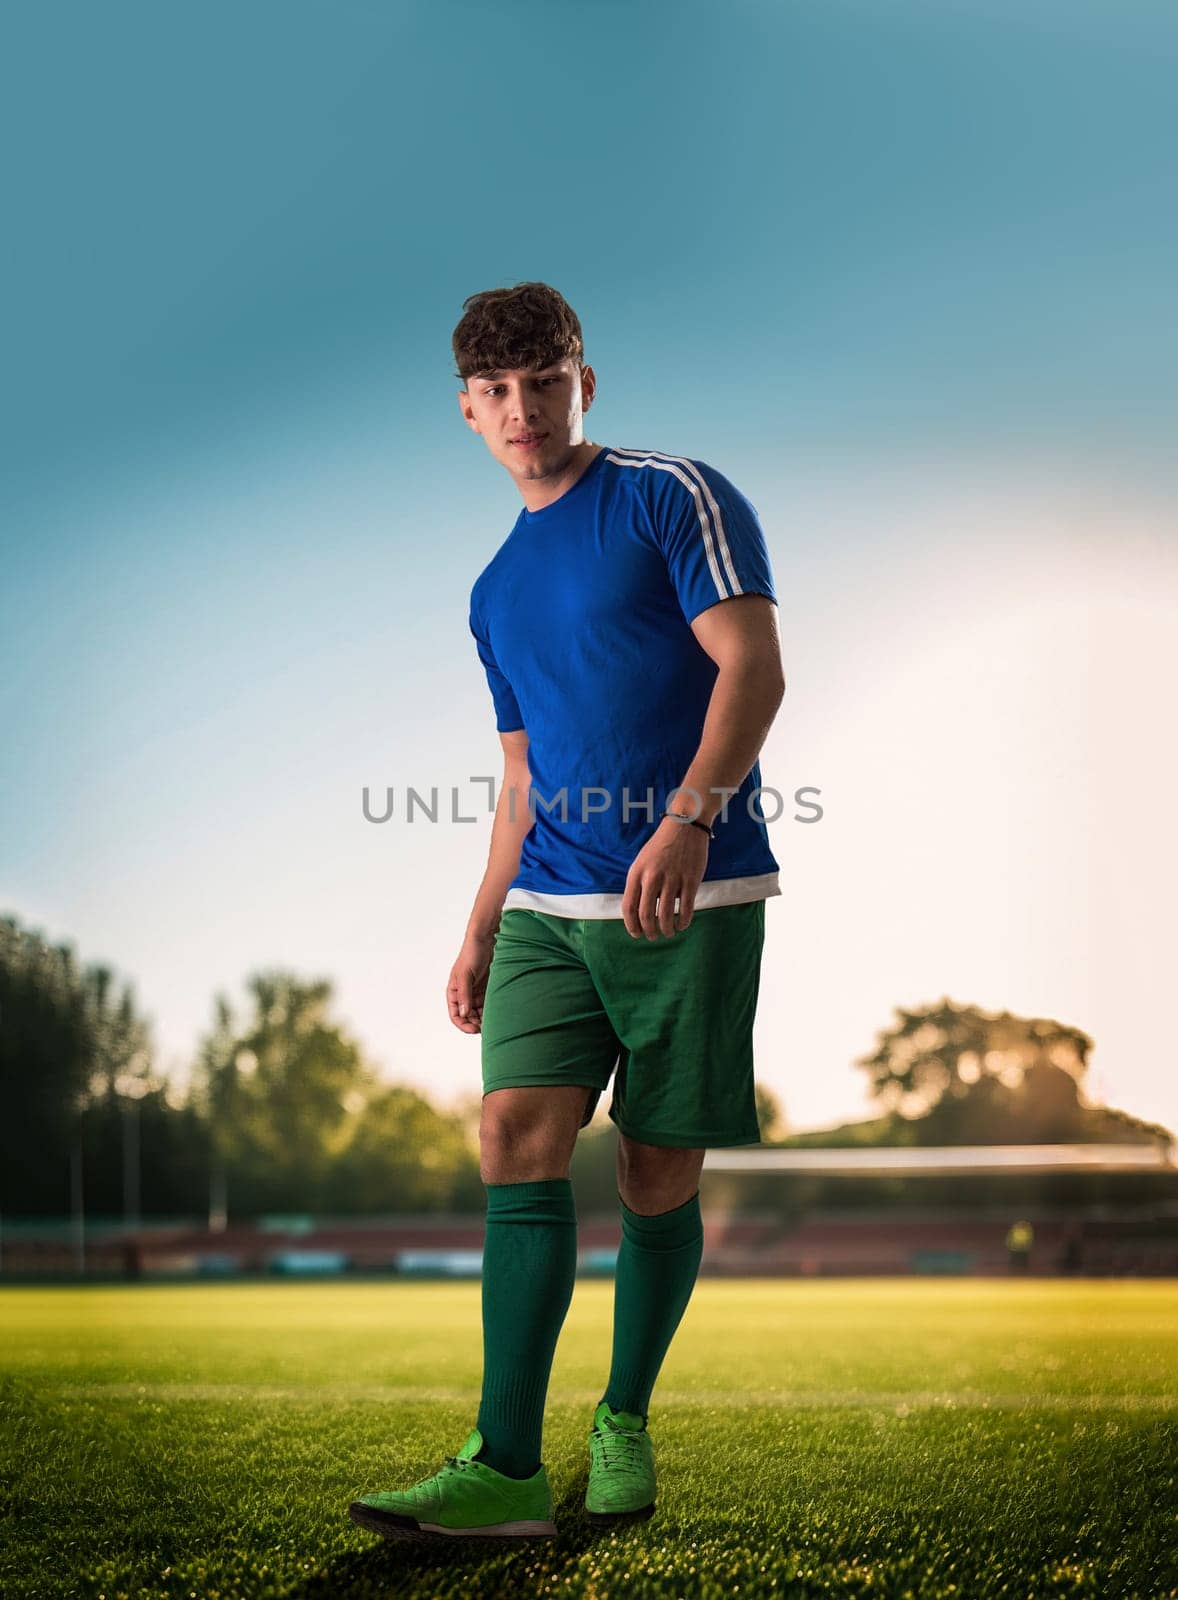 A Man Ready for Action on the Soccer Field by artofphoto